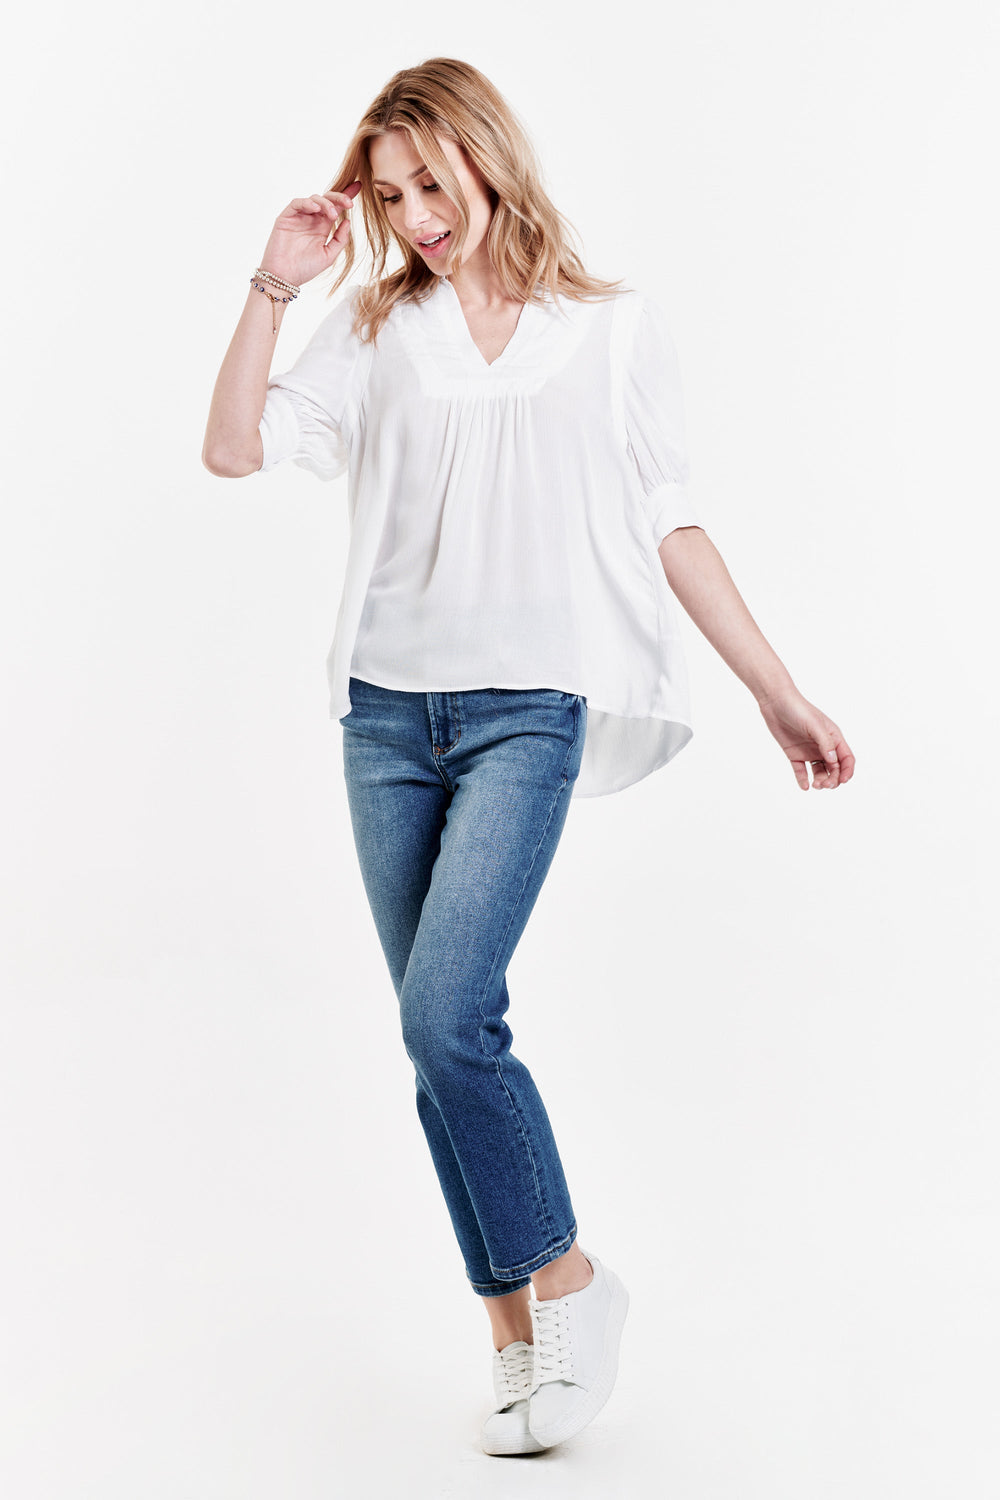 image of a female model wearing a RAVEN PUFF CUFF TUNIC TOP WHITE TOPS